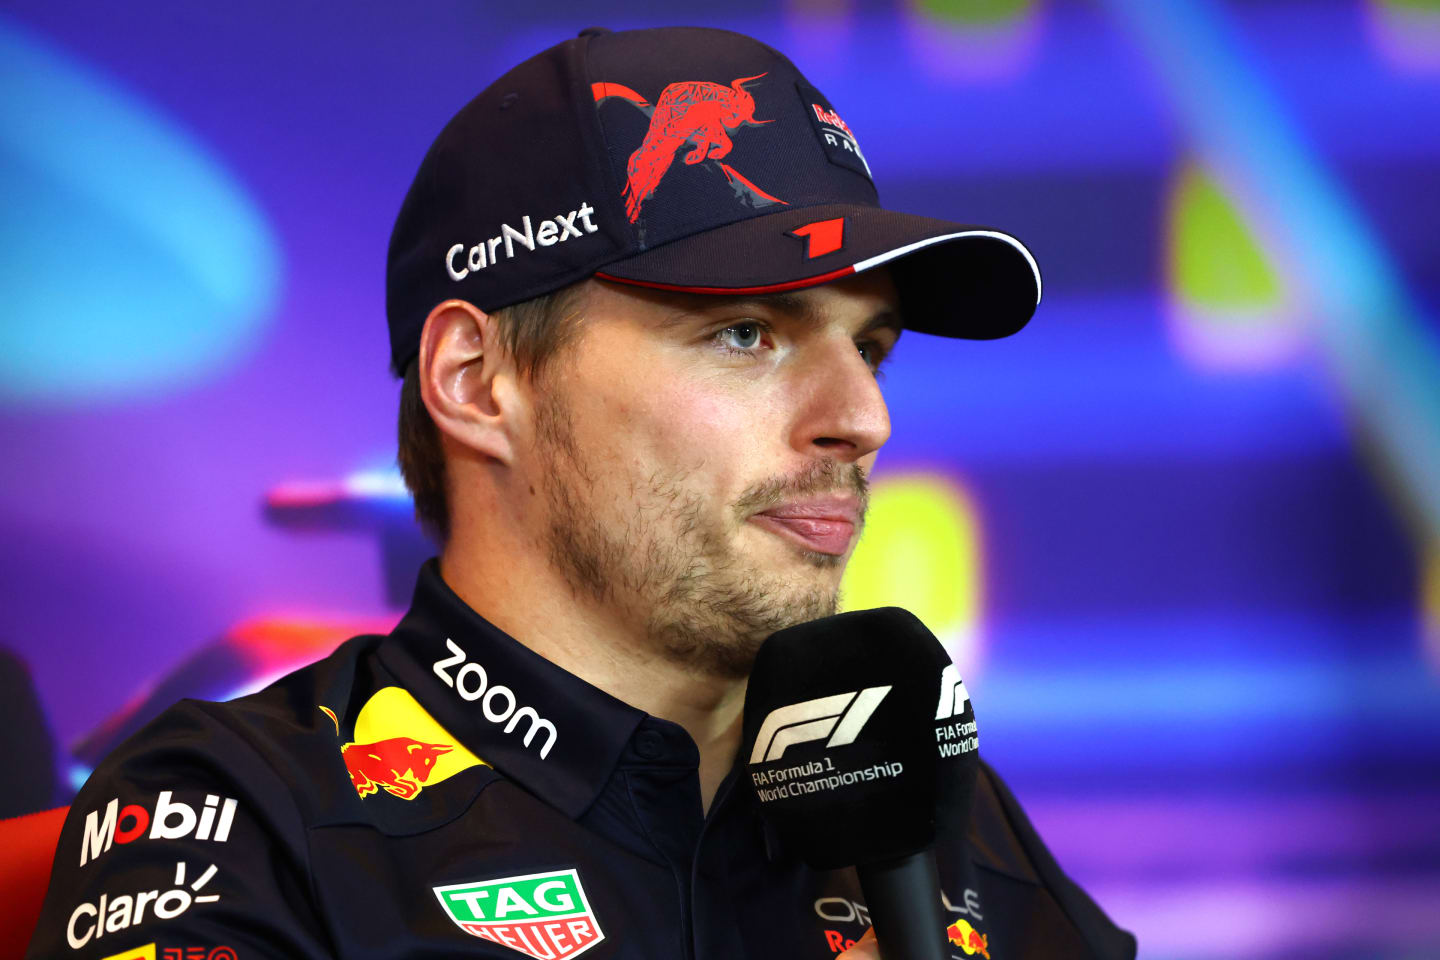 ABU DHABI, UNITED ARAB EMIRATES - NOVEMBER 17: Max Verstappen of the Netherlands and Oracle Red Bull Racing talks in a press conference during previews ahead of the F1 Grand Prix of Abu Dhabi at Yas Marina Circuit on November 17, 2022 in Abu Dhabi, United Arab Emirates. (Photo by Bryn Lennon/Getty Images)